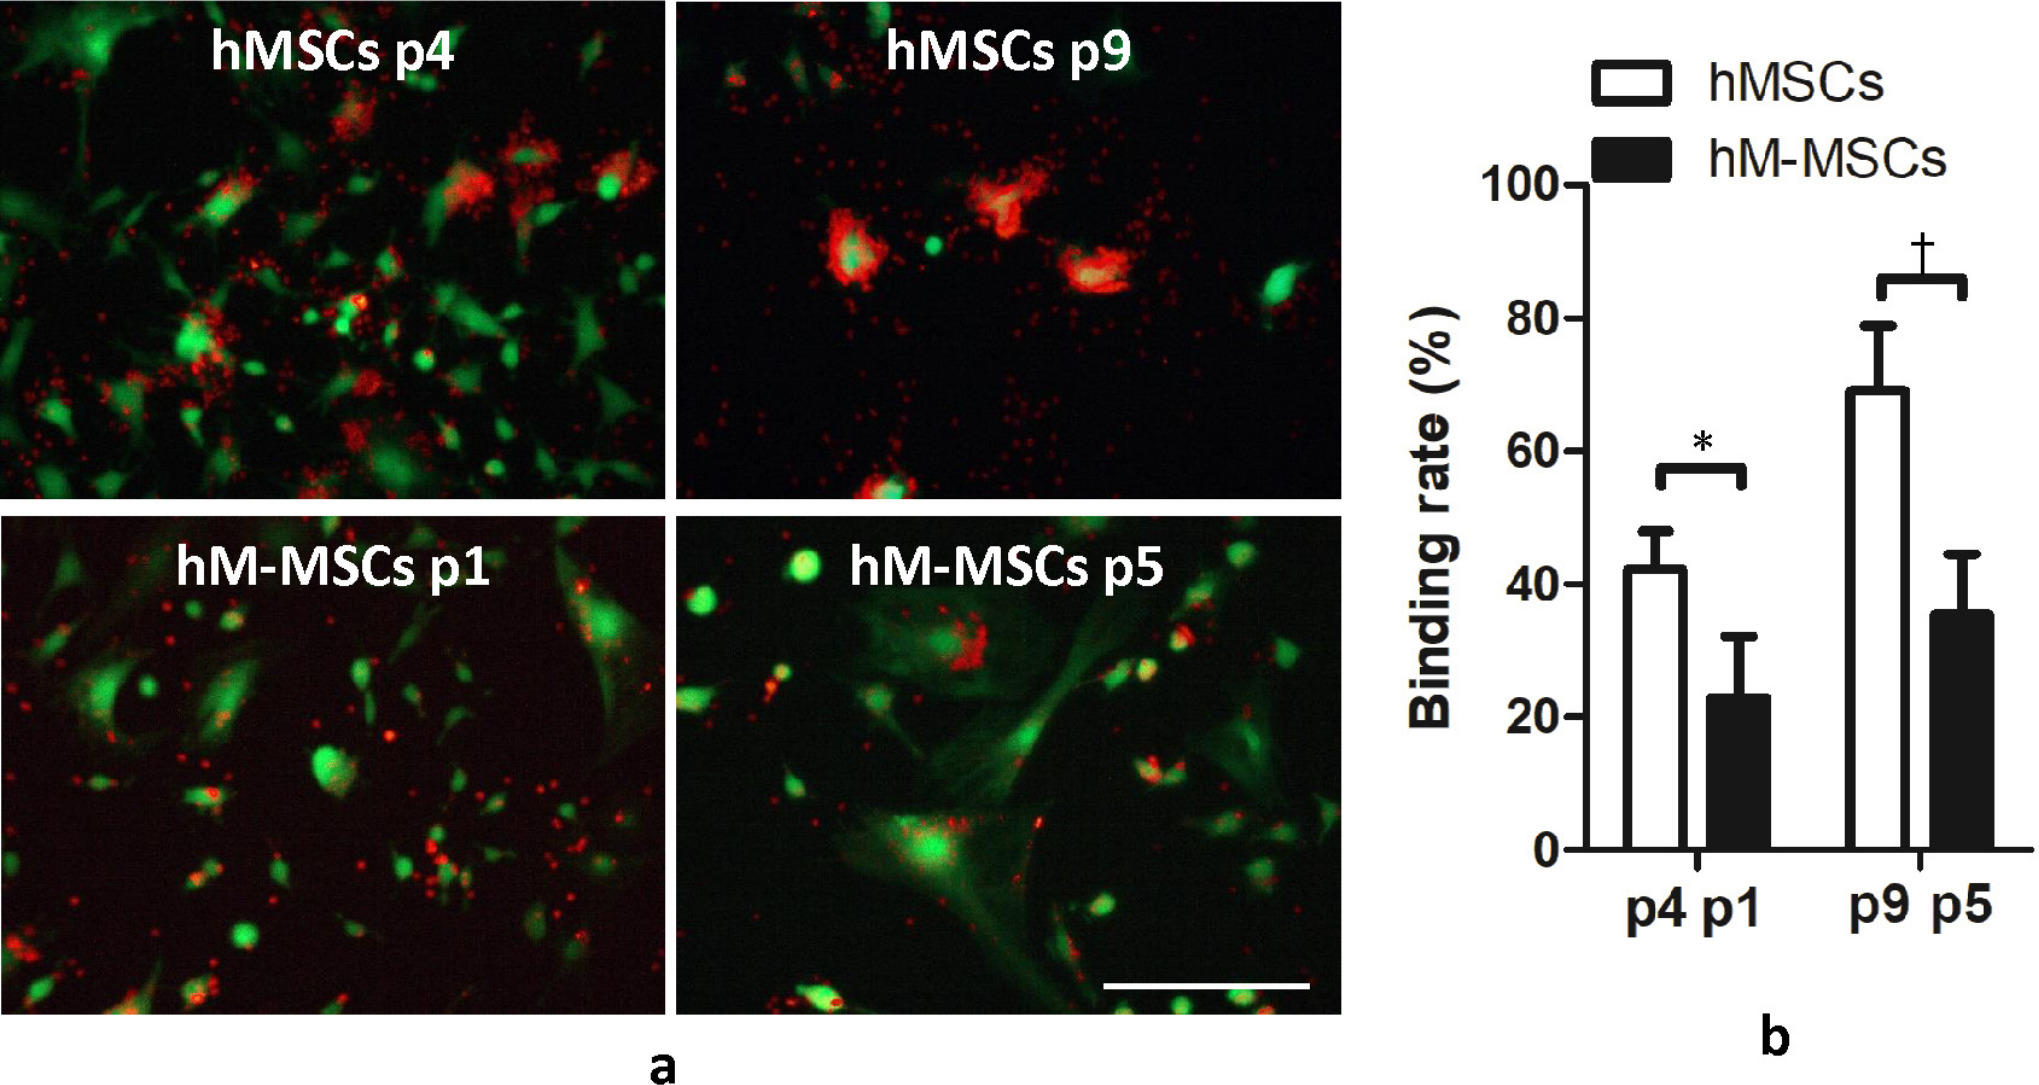 Fig. 3 
            Coculture of human peripheral blood lymphocytes (hPBLs) and manipulated human mesenchymal stem cells (hM-MSCs) (passage 1 or 5) or their untreated human mesenchymal stem cells (hMSCs) controls (passage 4 or passage 9) tested by Rosette forming assay. a) PKH26-labelled (red) stained PBLs formed rosette rings around PKH67-labelled (green) stained hM-MSCs. b) PBL binding rate of hMSC controls or hM-MSCs. Binding rate was calculated as hPBLs binding hMSCs or hM-MSCs (> ten hPBLs binding to one hMSC or hM-MSC) to the total number of hMSCs or hM-MSCs in five random spots. The representative images shown were derived from the bone marrow of donor 1. The data are expressed as mean and SD (n = 2 donors with three replicates from each donor). *p < 0.05, †p < 0.01 versus human mesenchymal stem cells (hMSCs) controls. Scale bar: 50 μm.
          